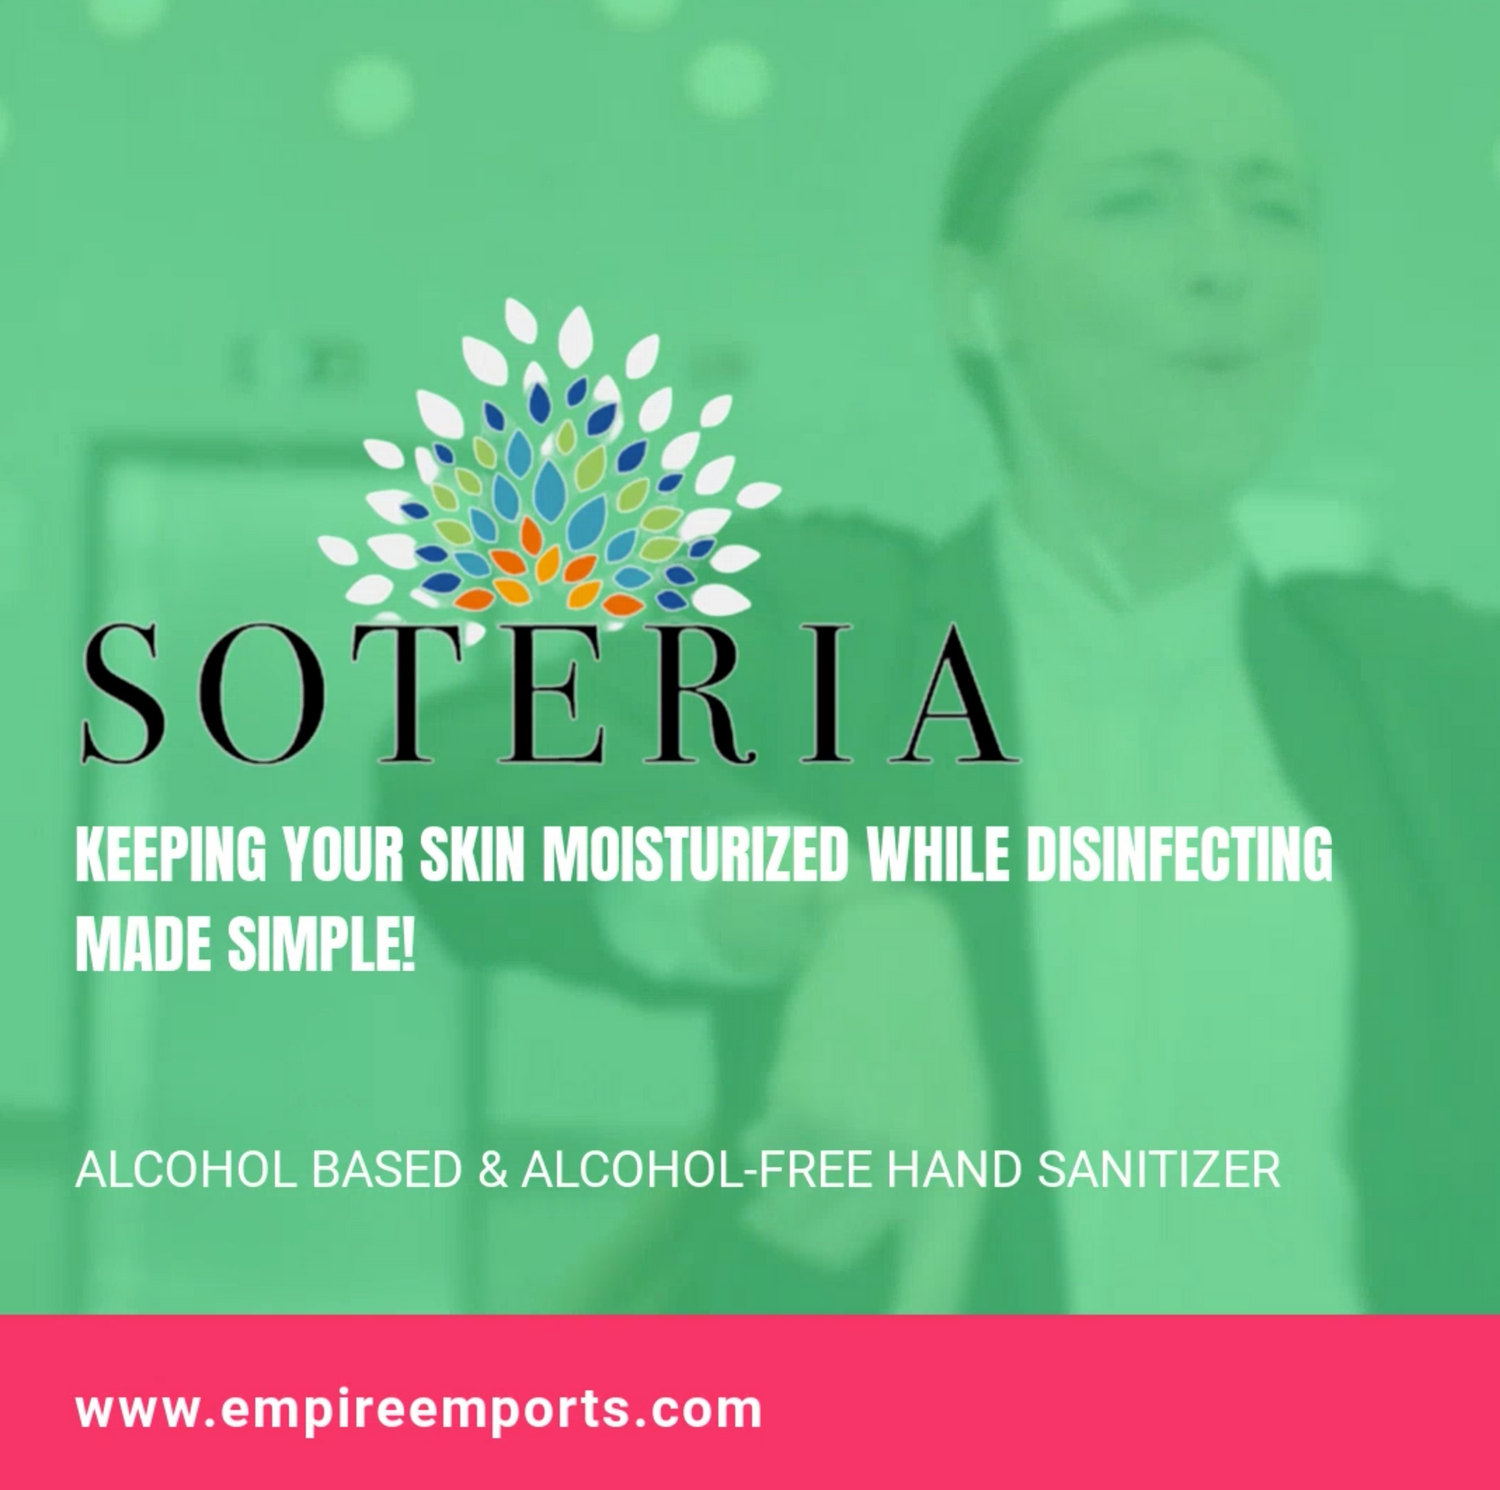 SOTERIA Hand Sanitizers